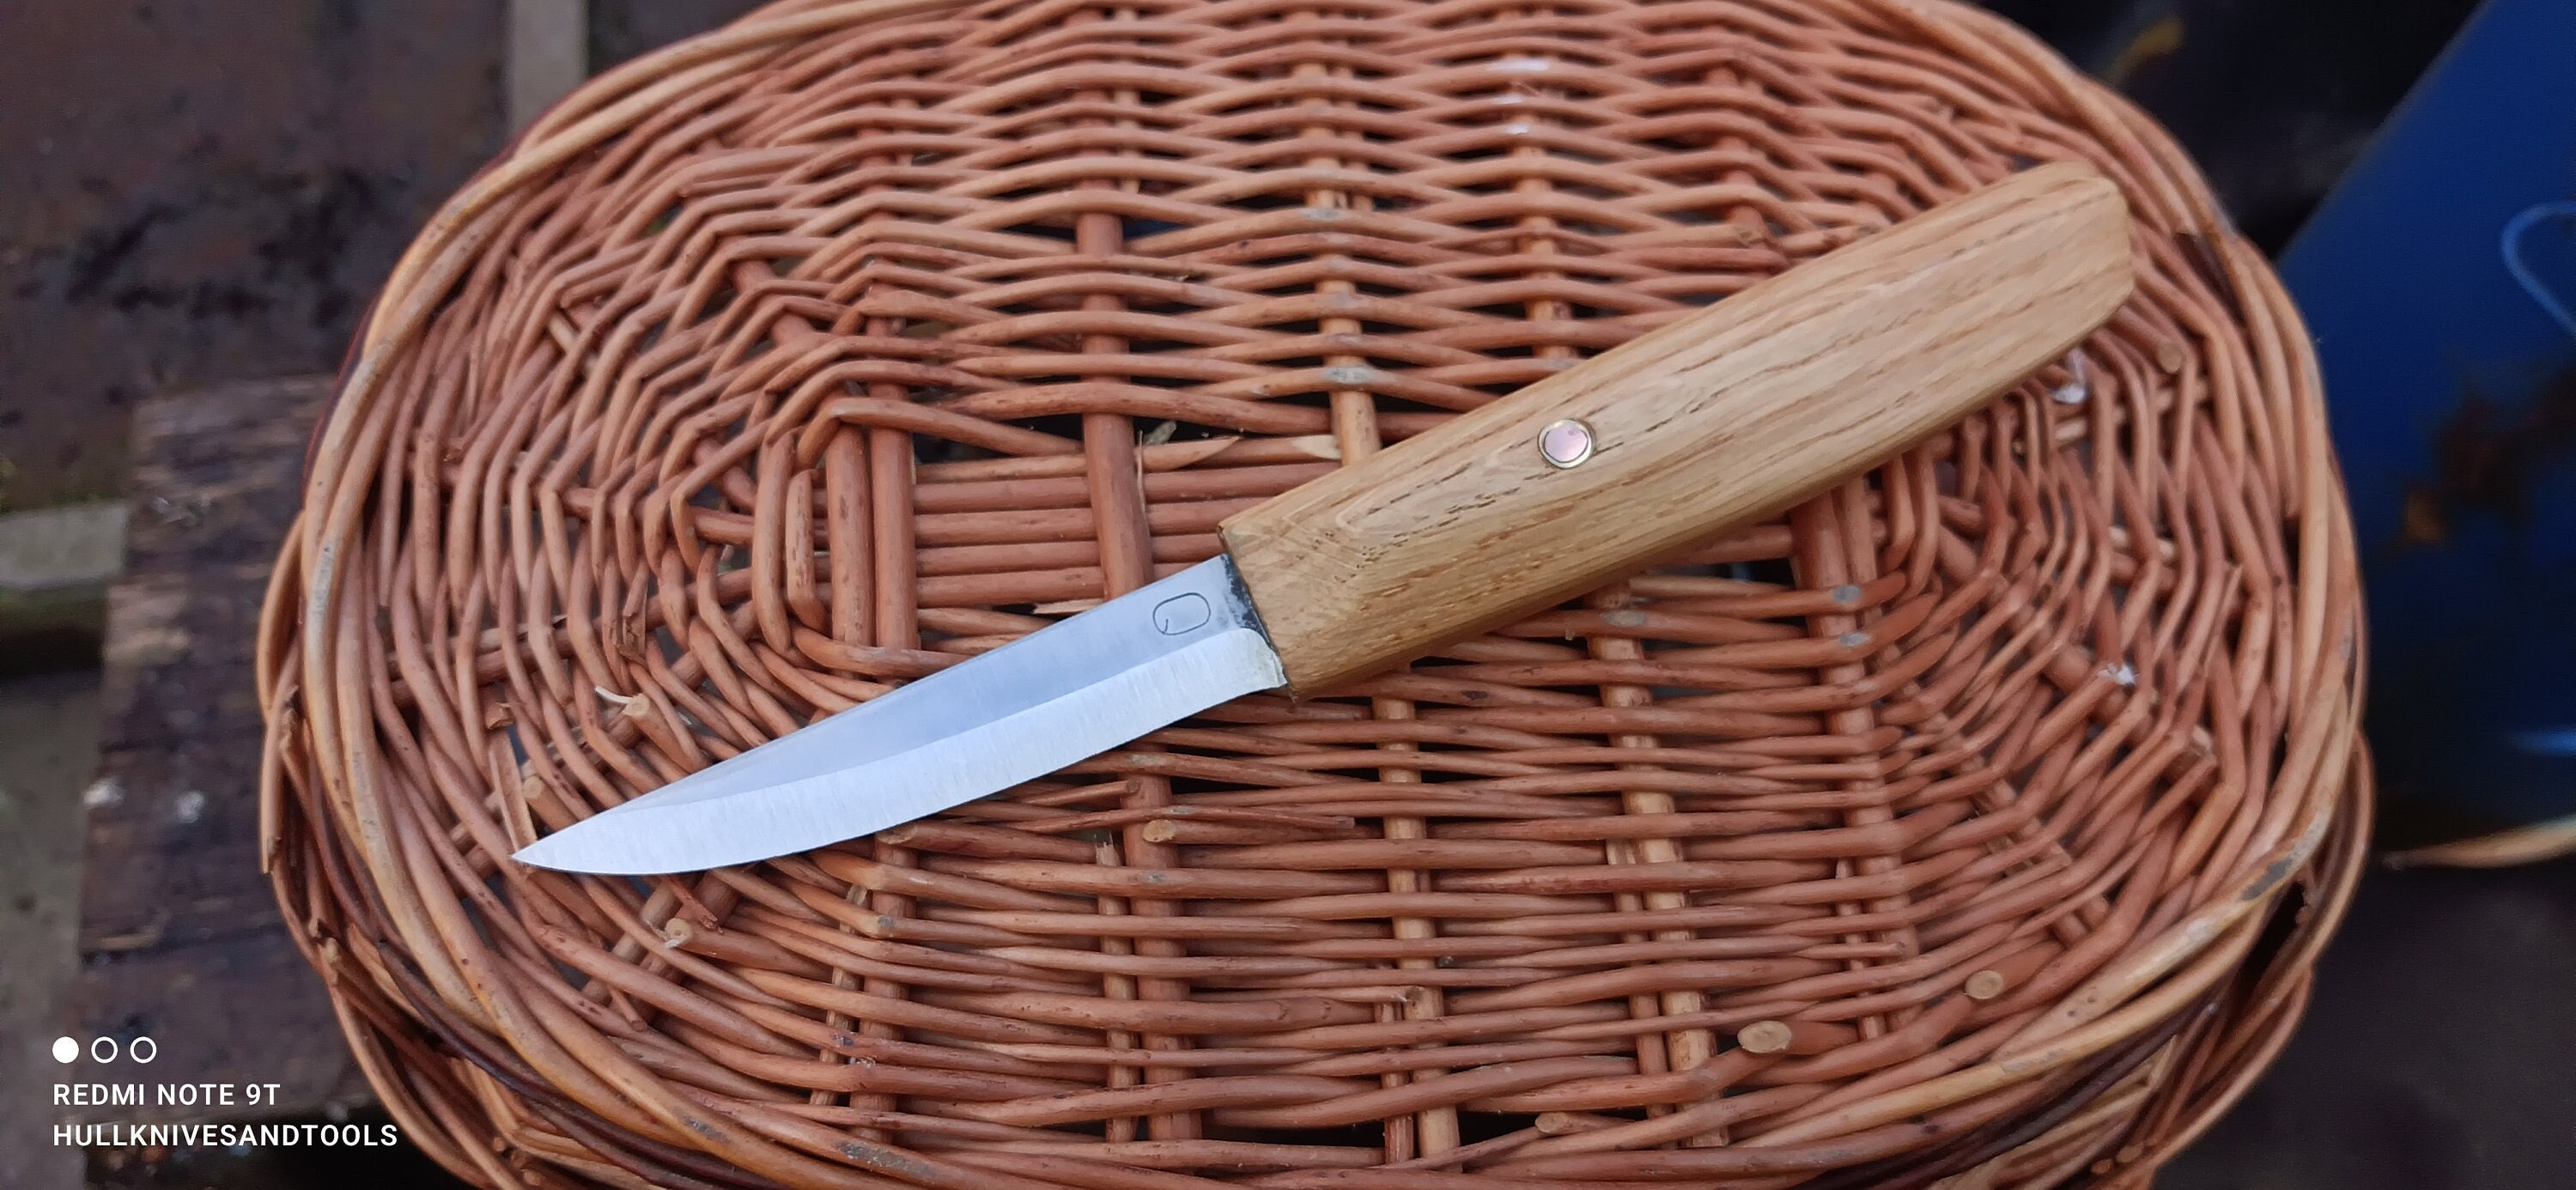 Forged Wood Carving Knife. Chip Carving Knife. Wood Carving Tools. Carving  Tool. Hand-forged Knife. Handmade. Carbon Steel Fixed Blade Knife 